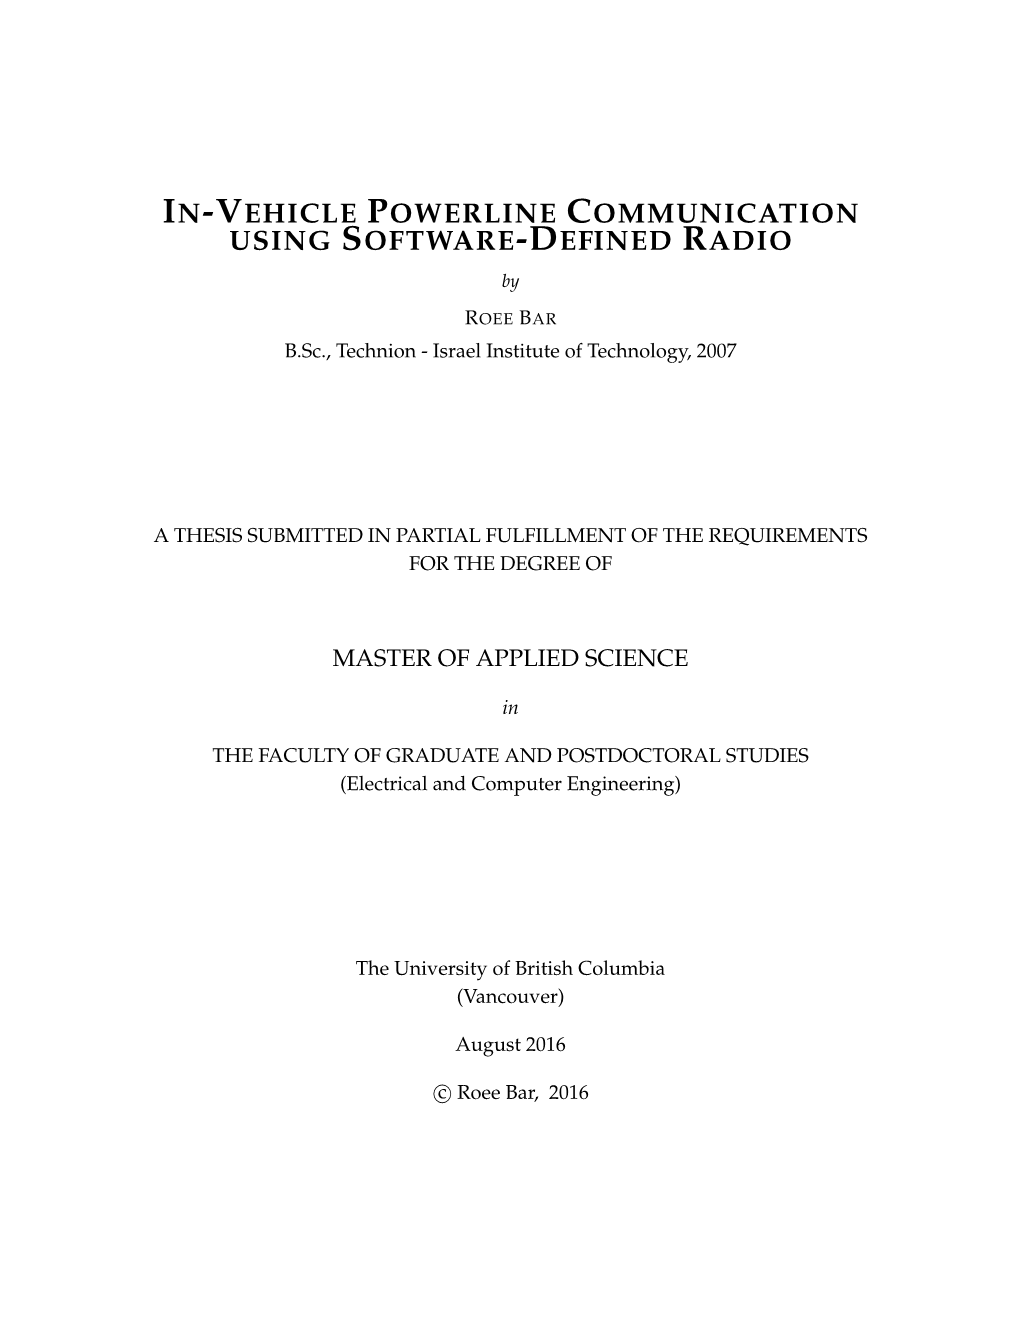 IN-VEHICLE POWERLINE COMMUNICATION USING SOFTWARE-DEFINED RADIO By